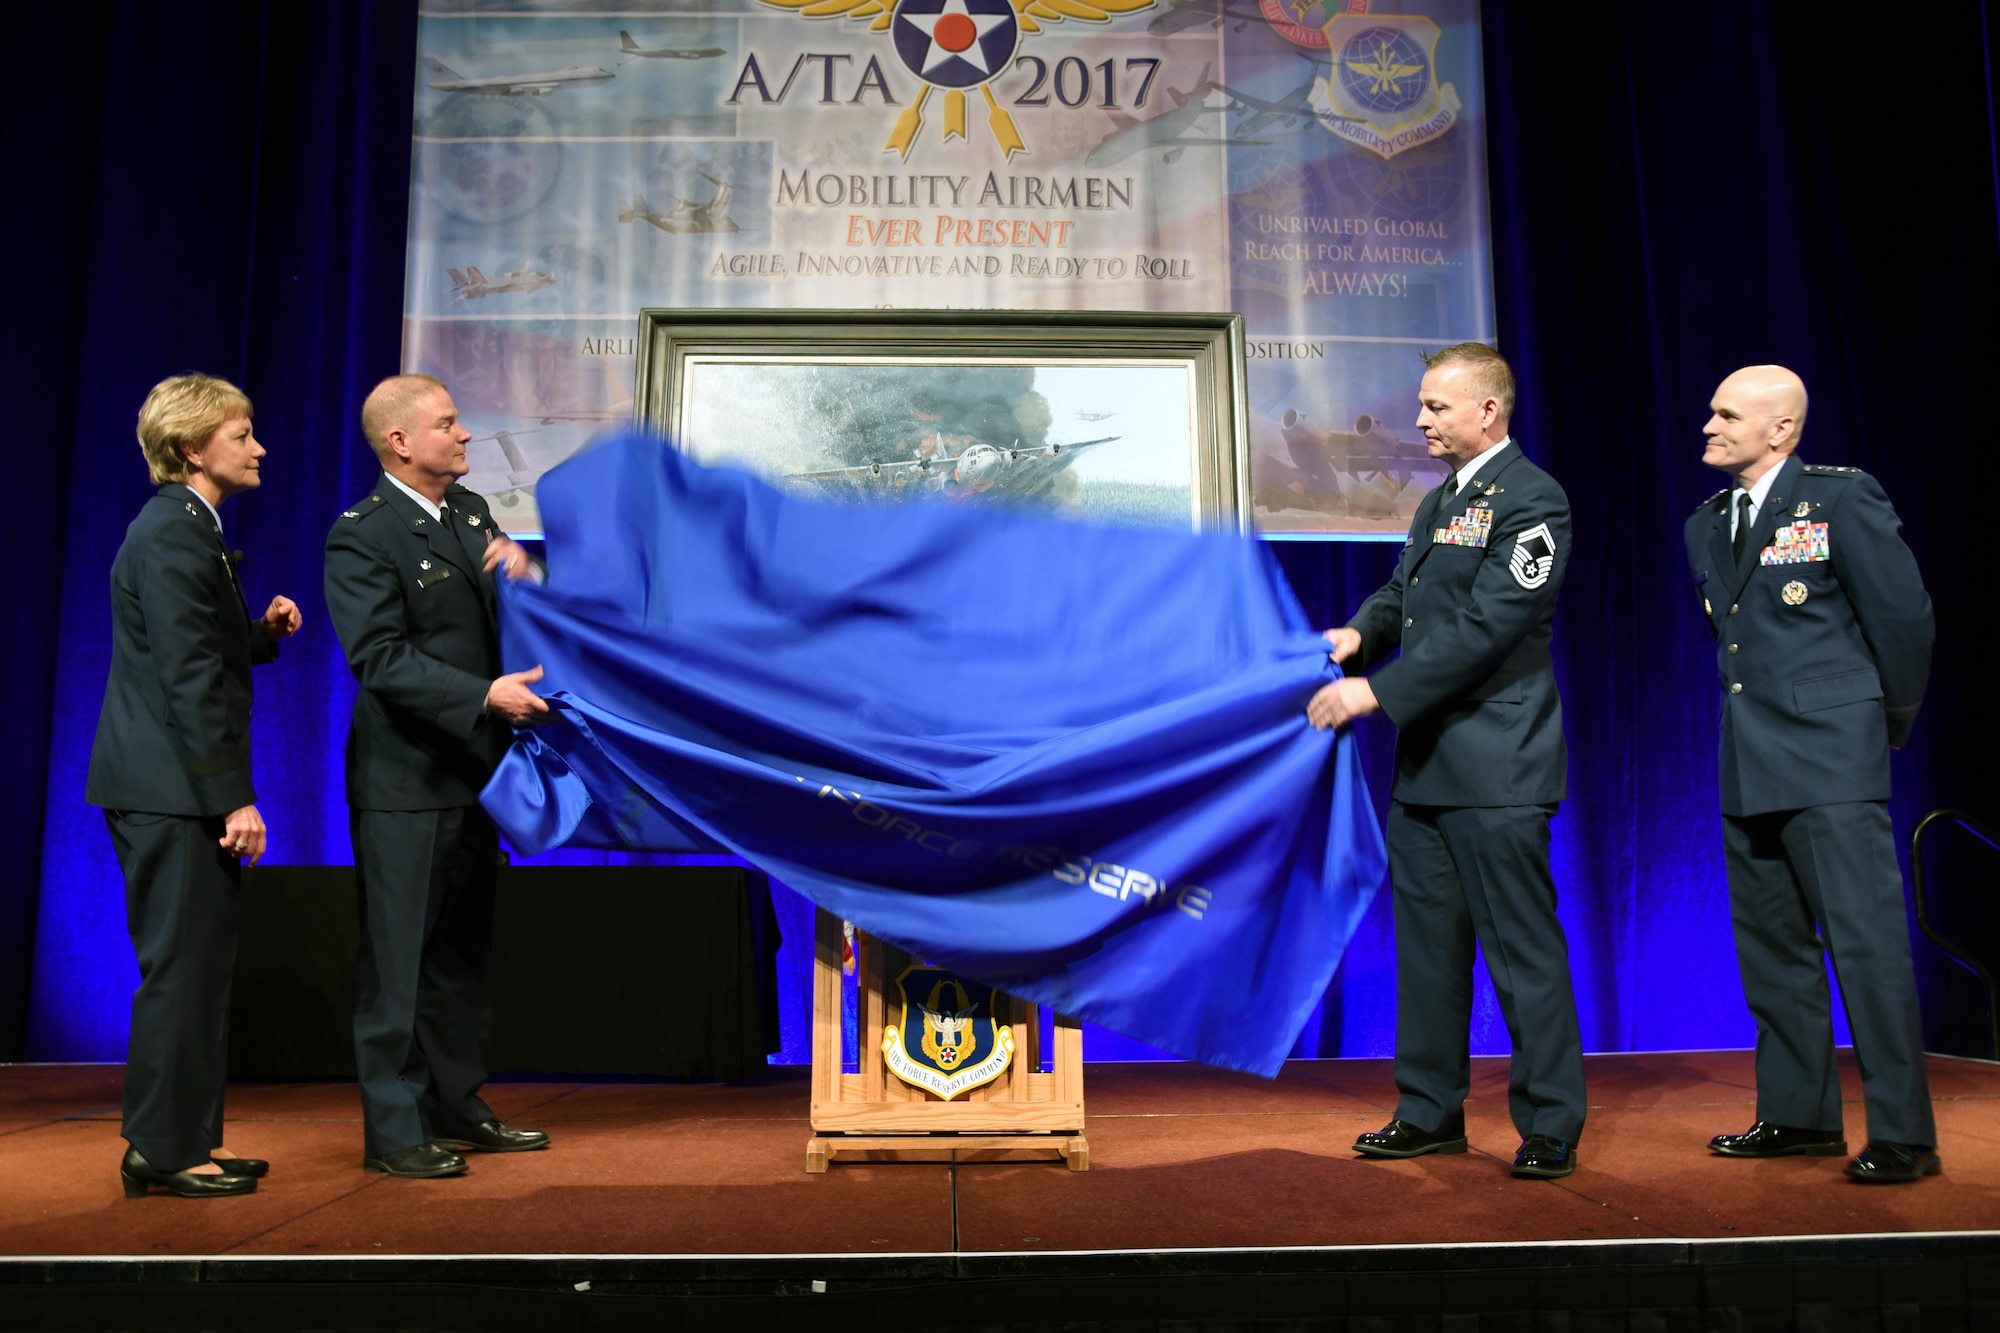 (From Left to right) Lt. Gen. Maryanne Miller, chief of the Air Force Reserve and commander of Air Force Reserve Command, Col. James Devere, 302nd Airlift Wing commander, Senior Master Sgt. Darby Perrin, artist, and Gen. Carlton D. Everhart II, commander of Air Mobility Command unveiled the painting "Earth, Blood and Fire" at the 49th annual Air Mobility Command and Airlift/Tanker Association Symposium in Orlando, Florida. The painting depicts the Modular Airborne Fire Fighting Systems mission of the 731st Airlift Squadron, 302 AW, Peterson Air Force Base, Colorado. (U.S. Air Force photo by Tech. Sgt. Peter Dean)